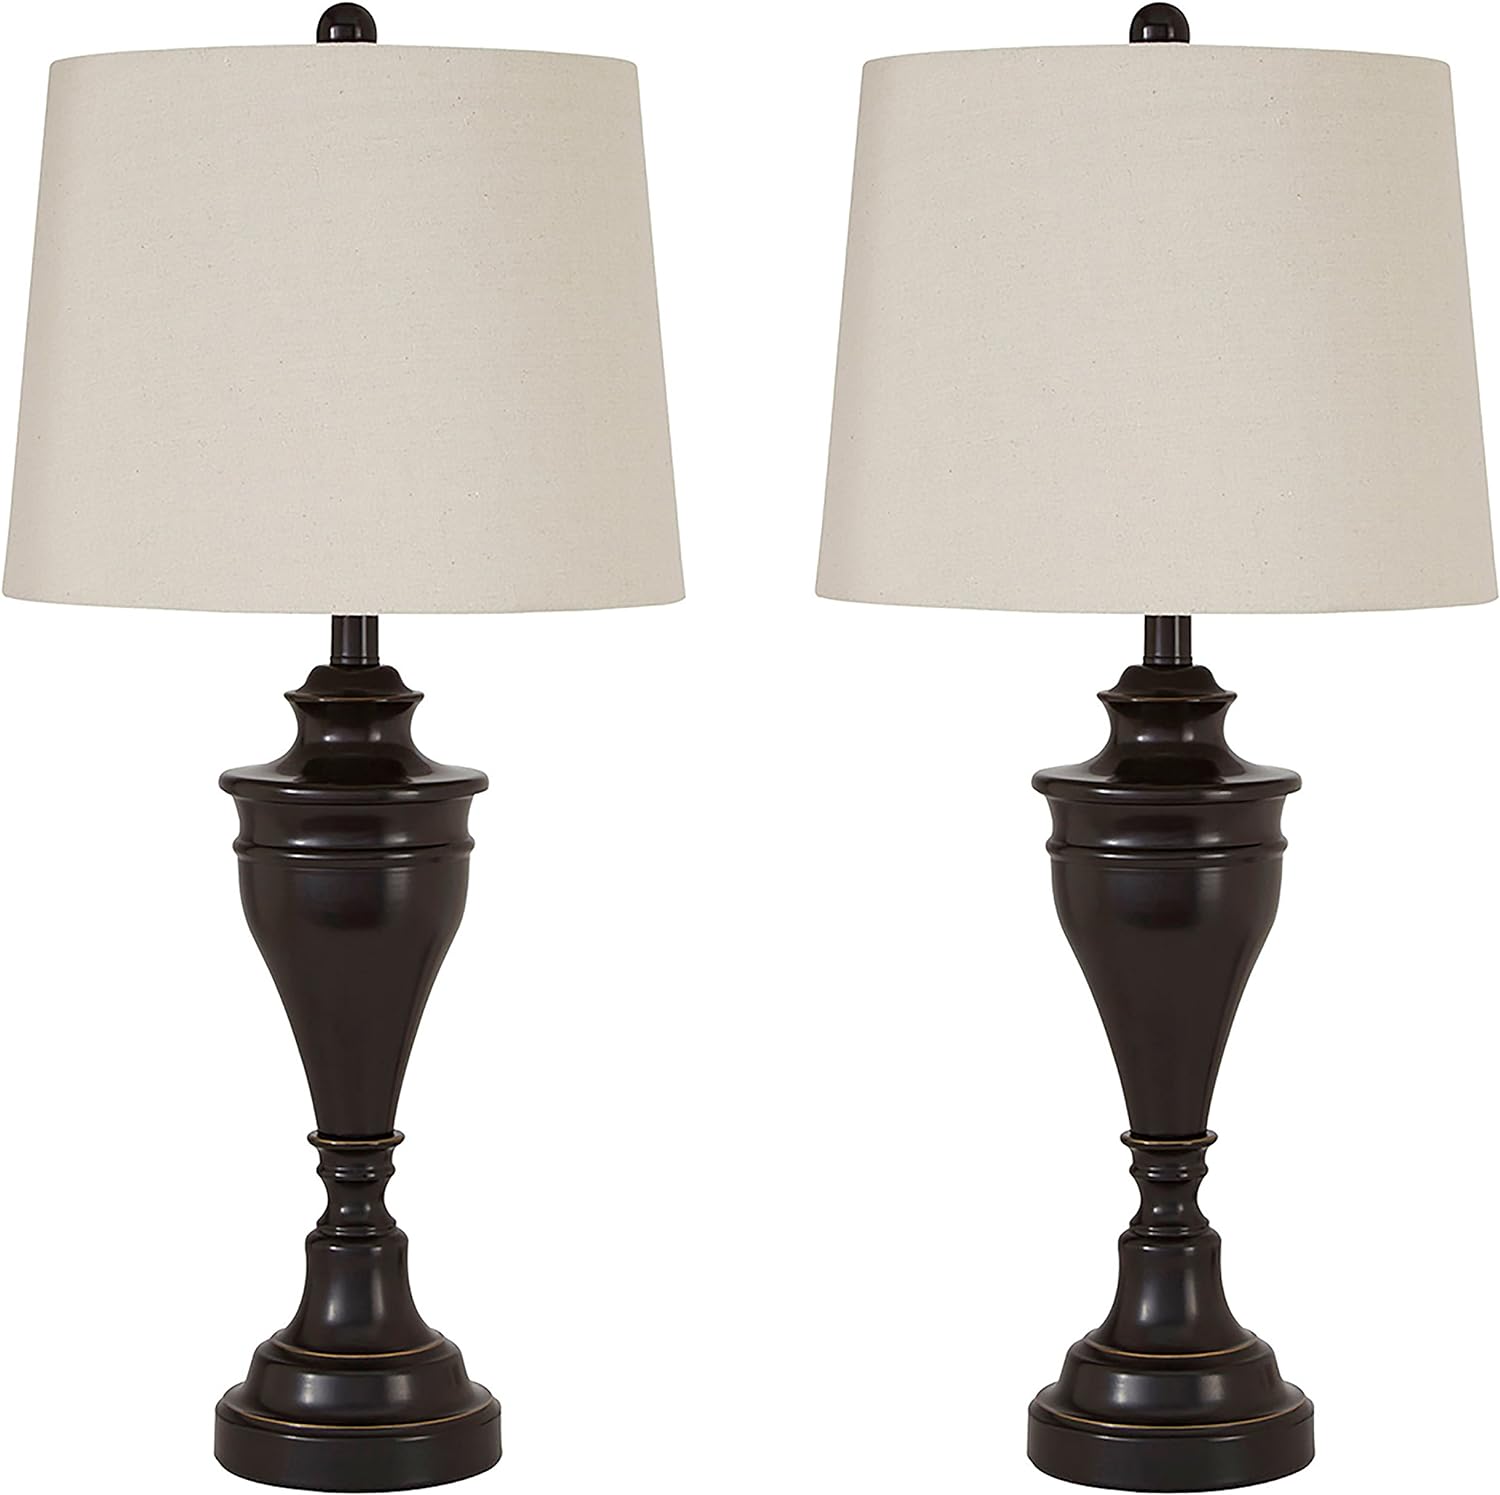 Signature Design by Ashley Darlita Traditional 29 Table Lamp with Pedestal Base, 2 Count, Dark Brown with White Shade